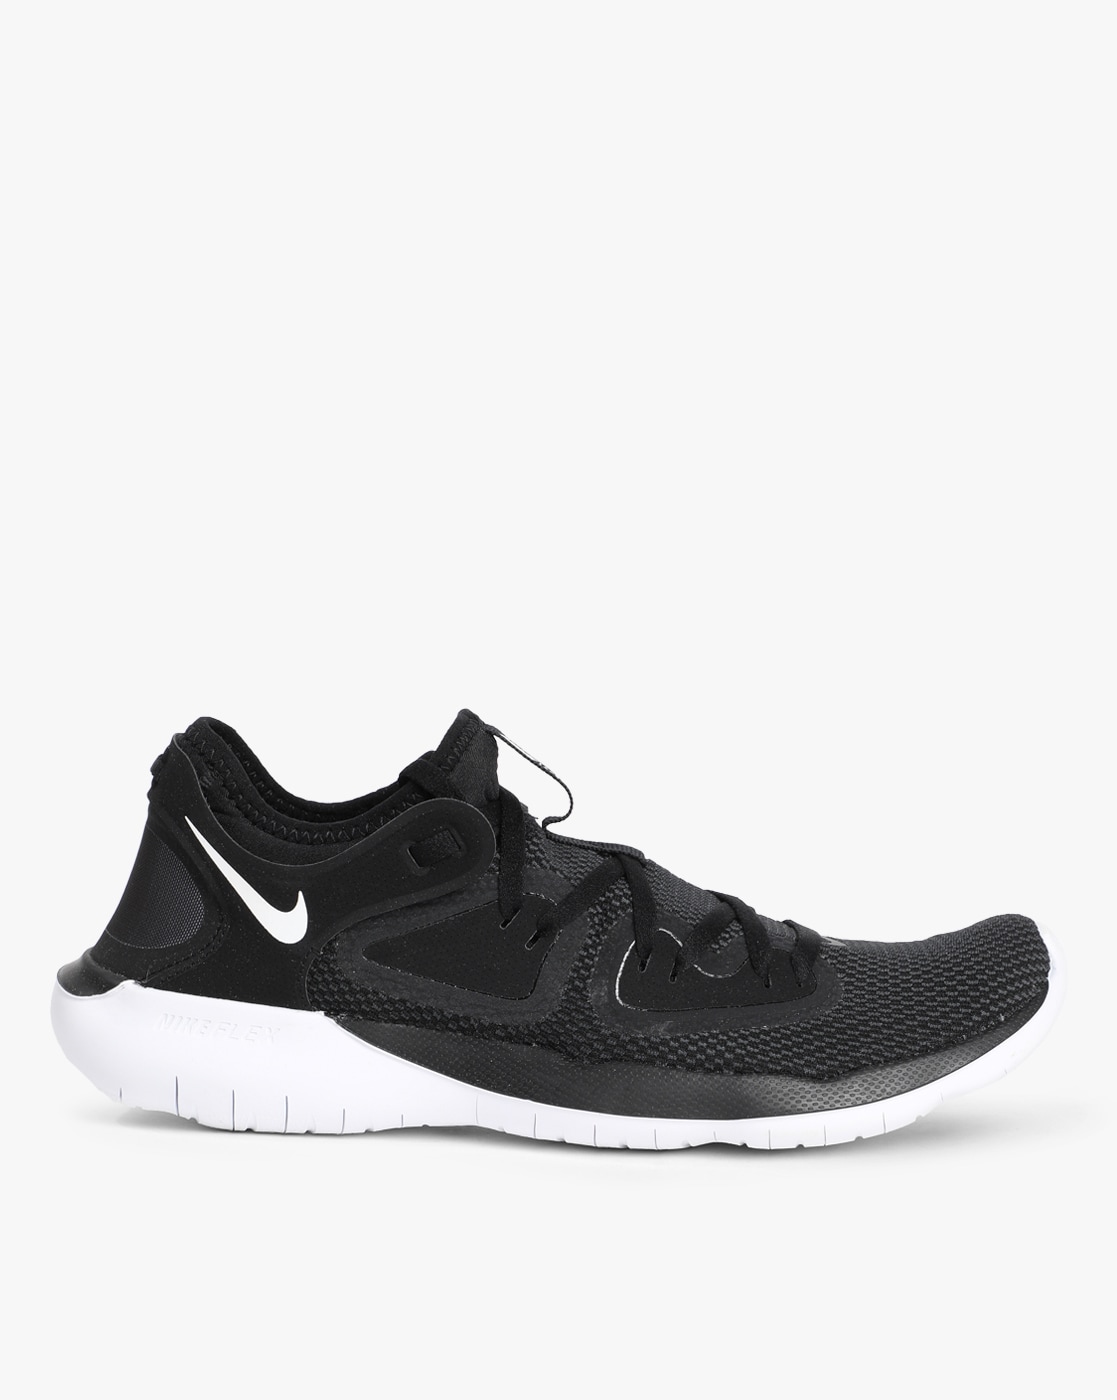 pictures of nike shoes 2019